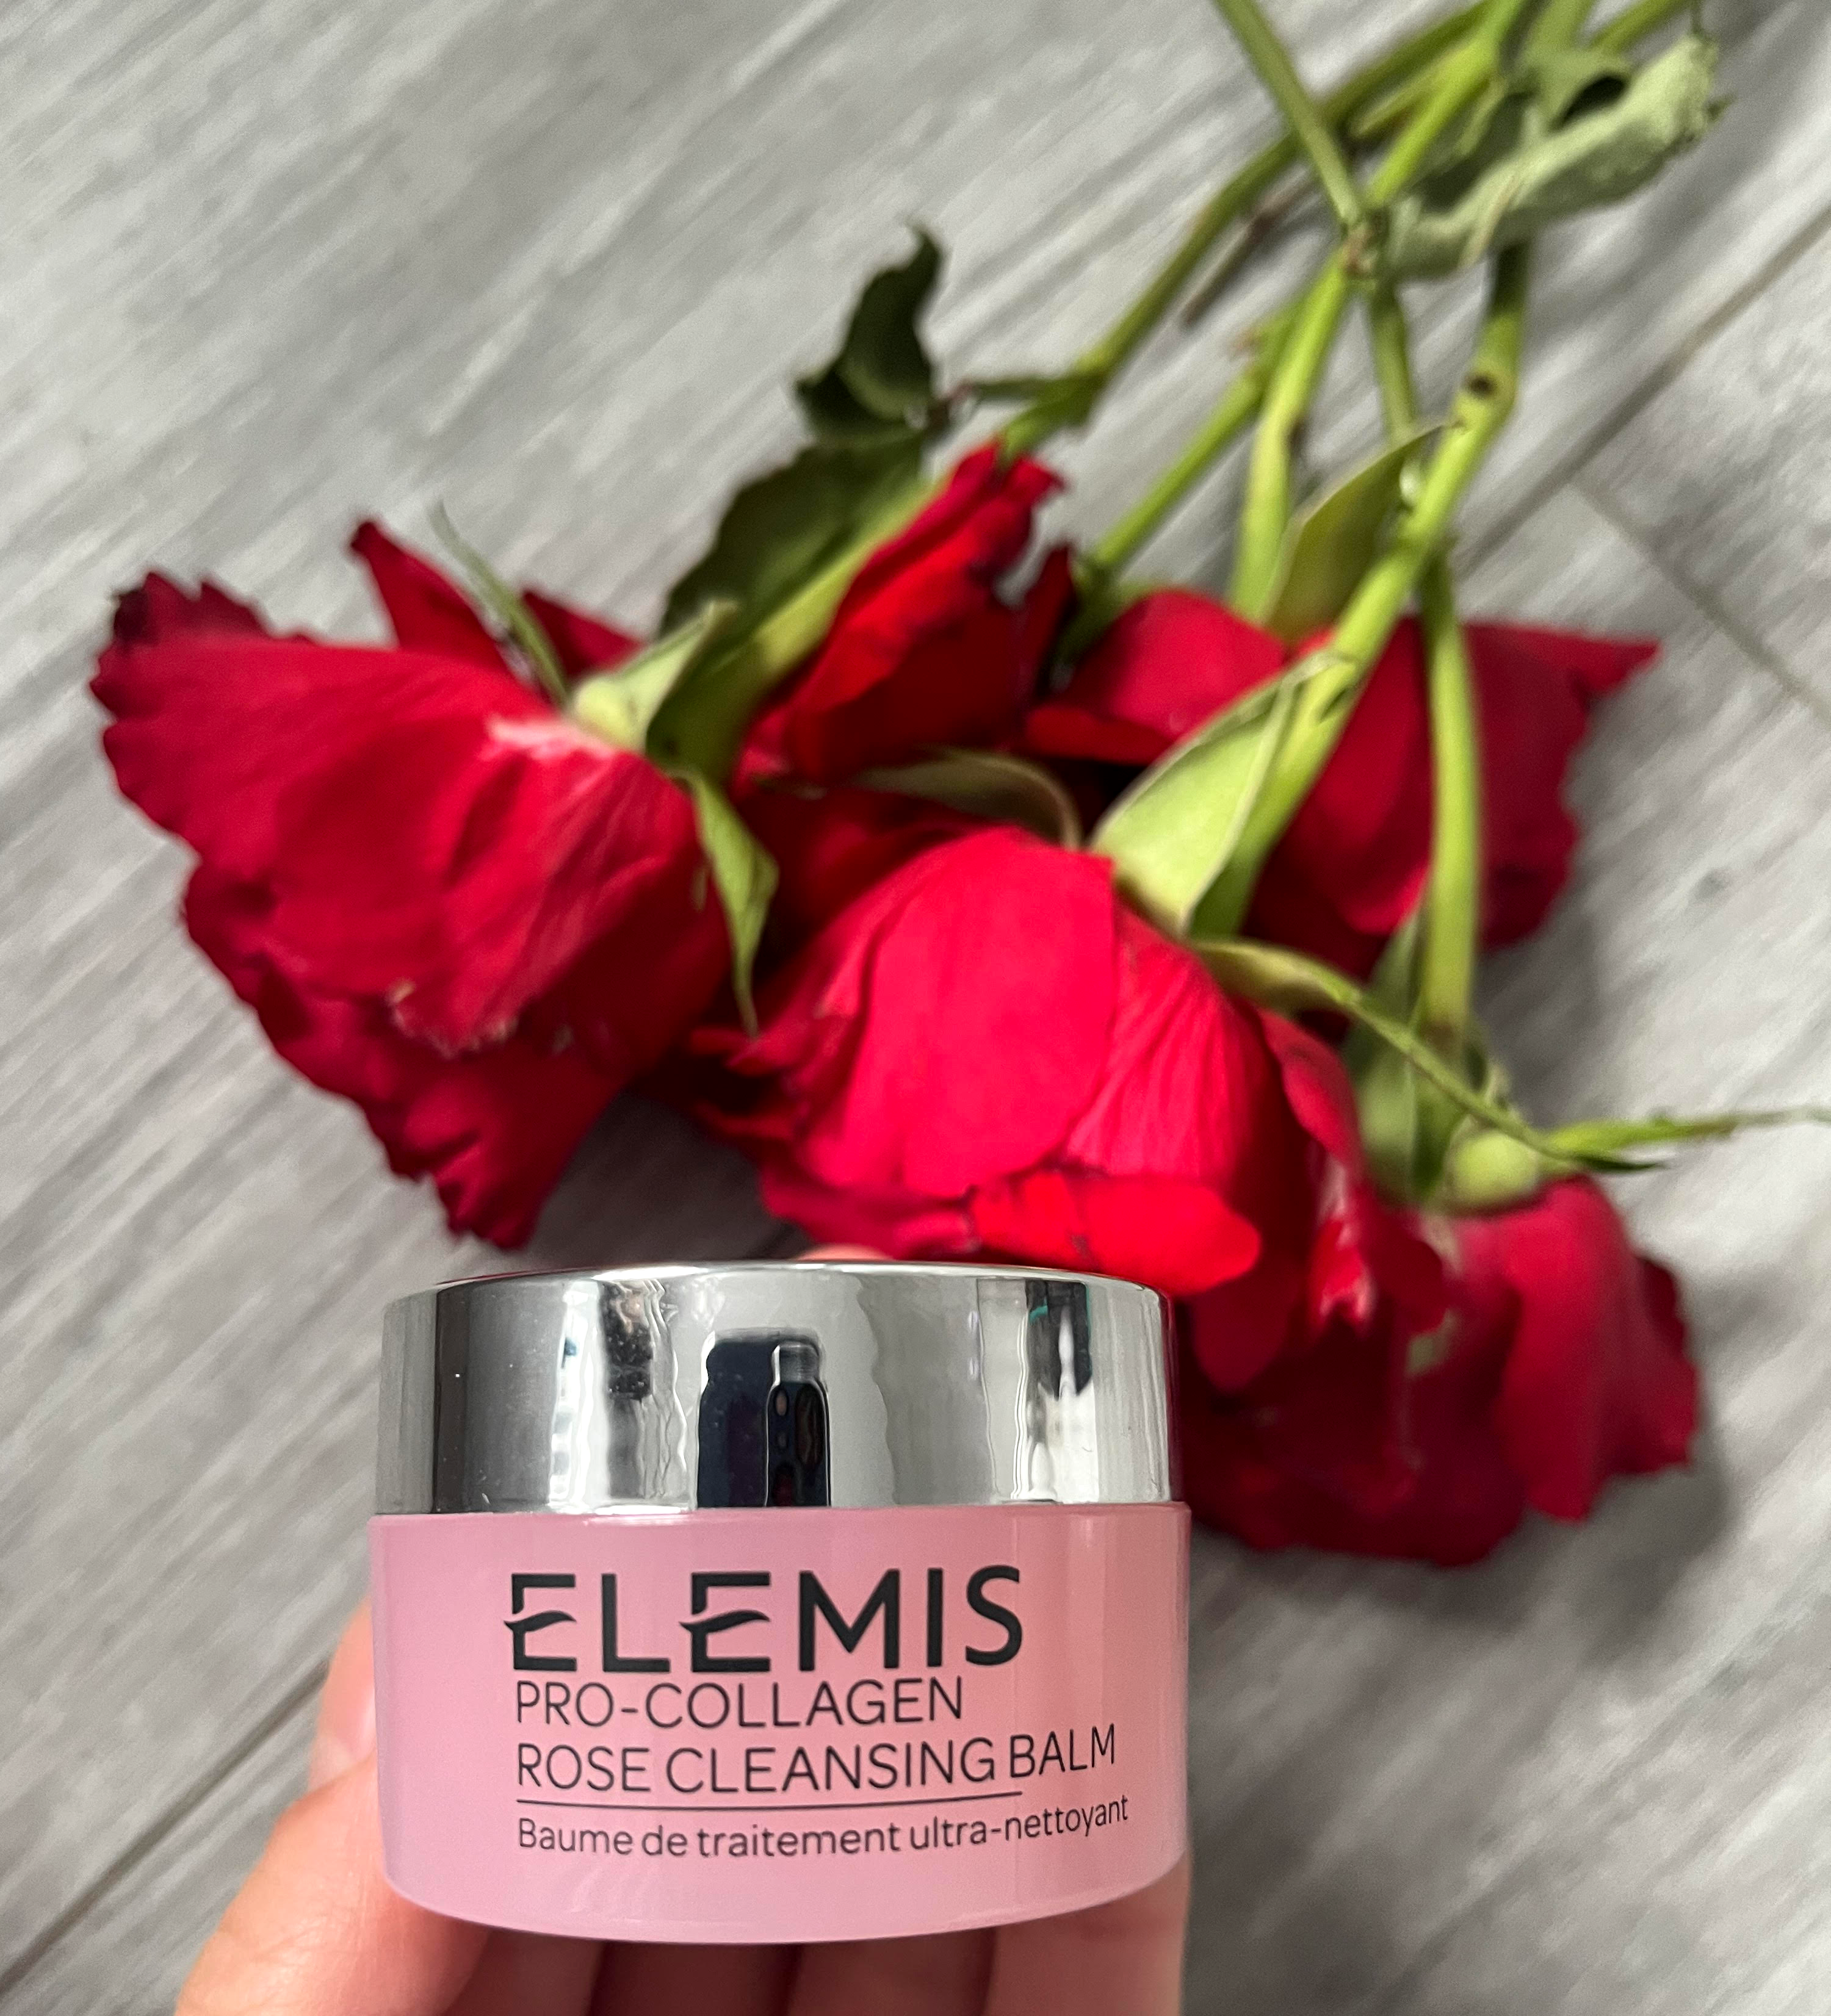 Elemis Pro-Collagen Rose Hydro Mist & Rose Cleansing Balm review